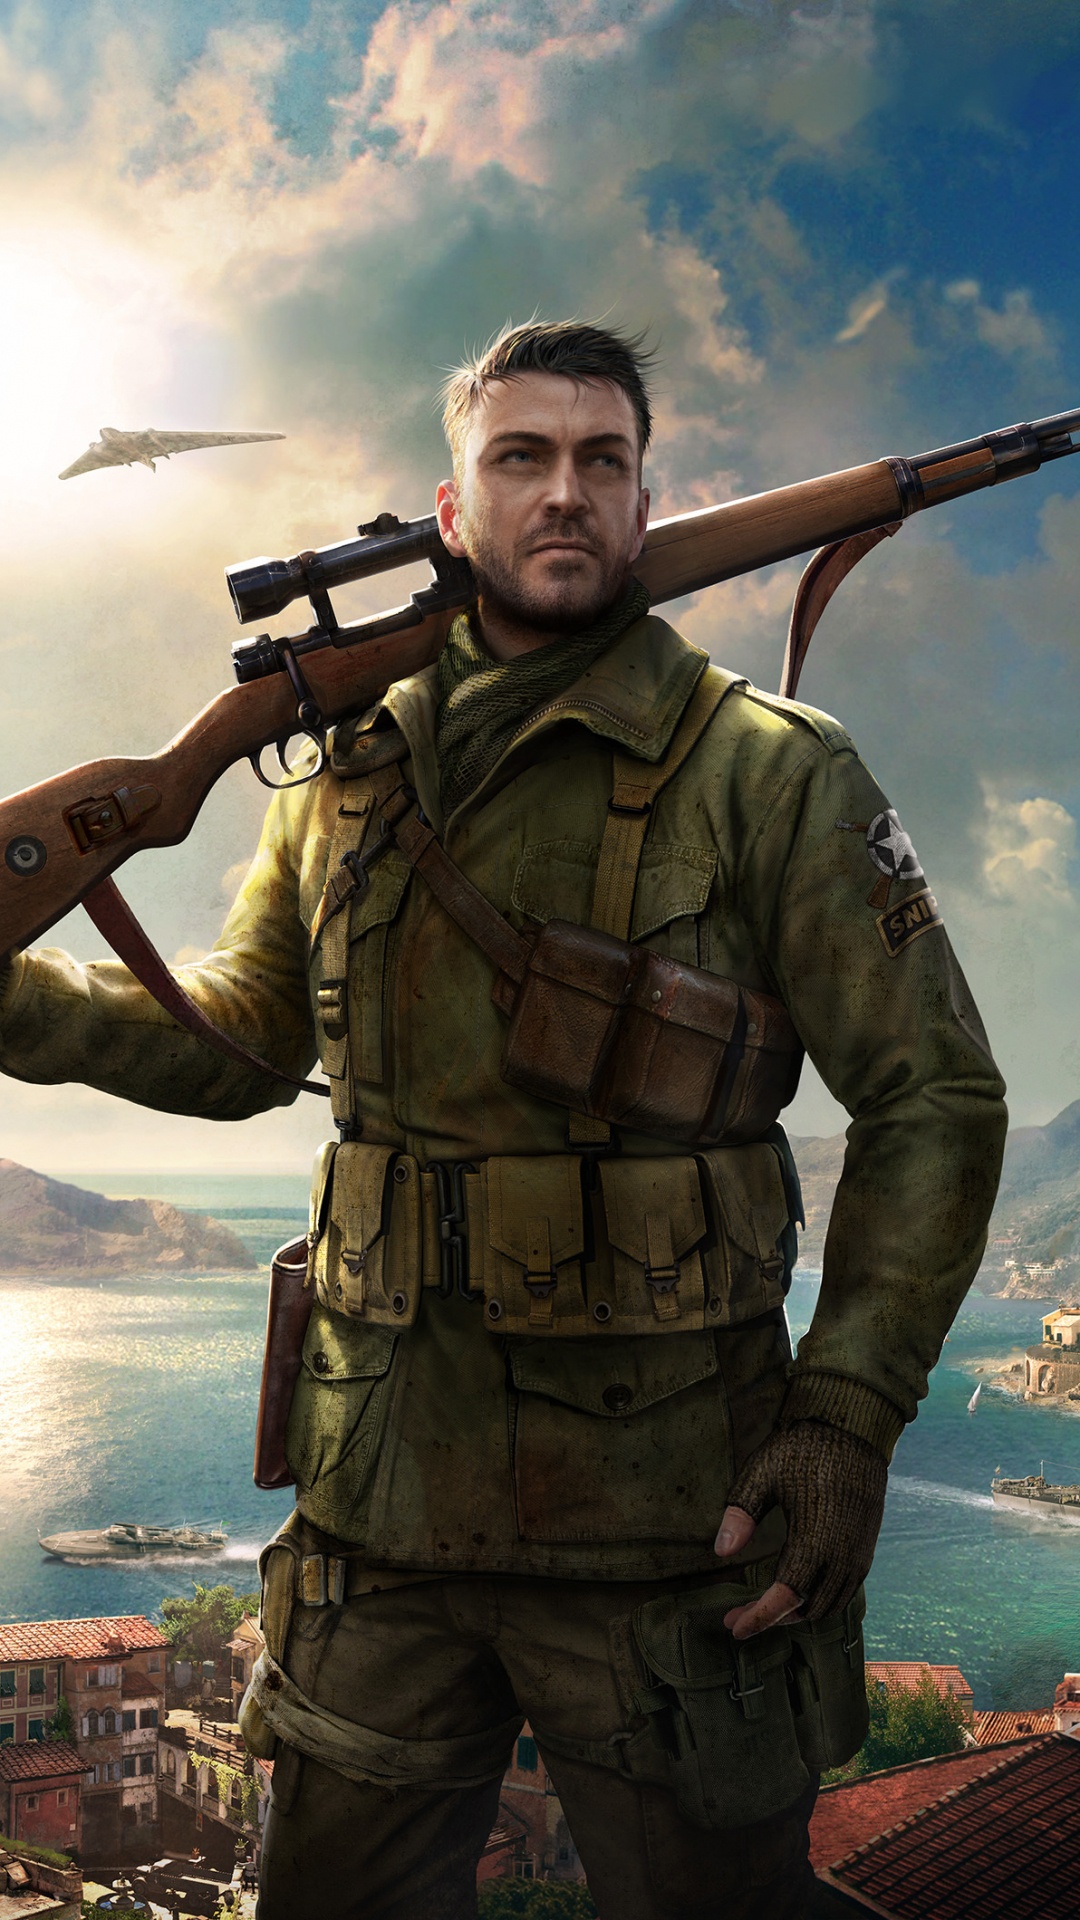 Sniper Elite 4, Shooter Game, Xbox One, Soldier, pc Game. Wallpaper in 1080x1920 Resolution